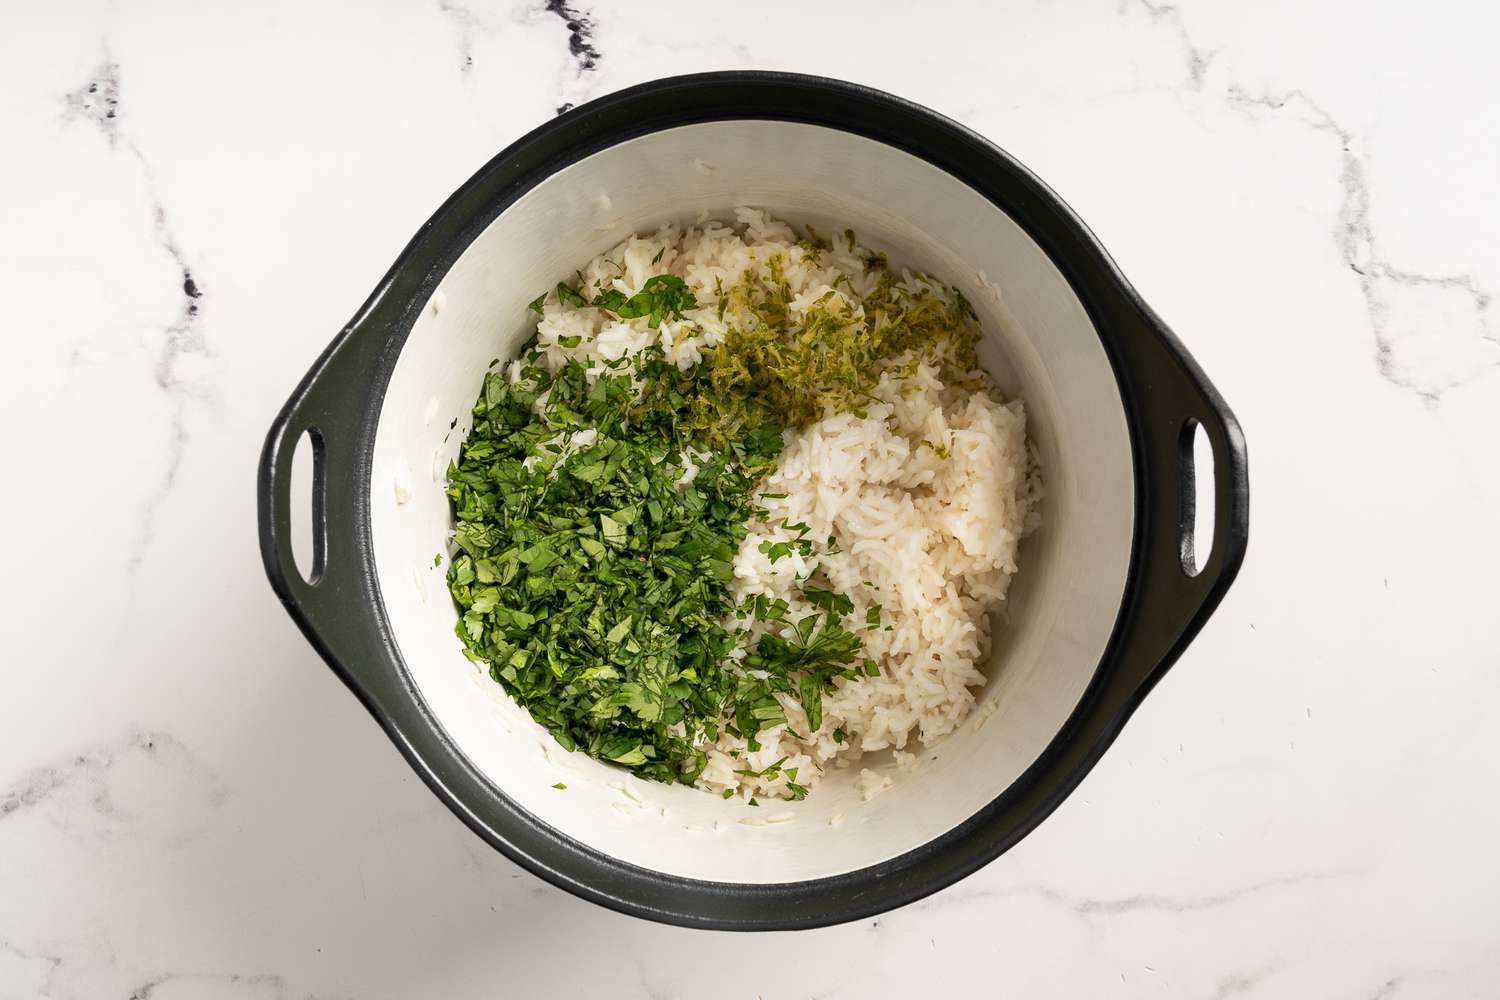 Lime and cilantro added to cooked rice